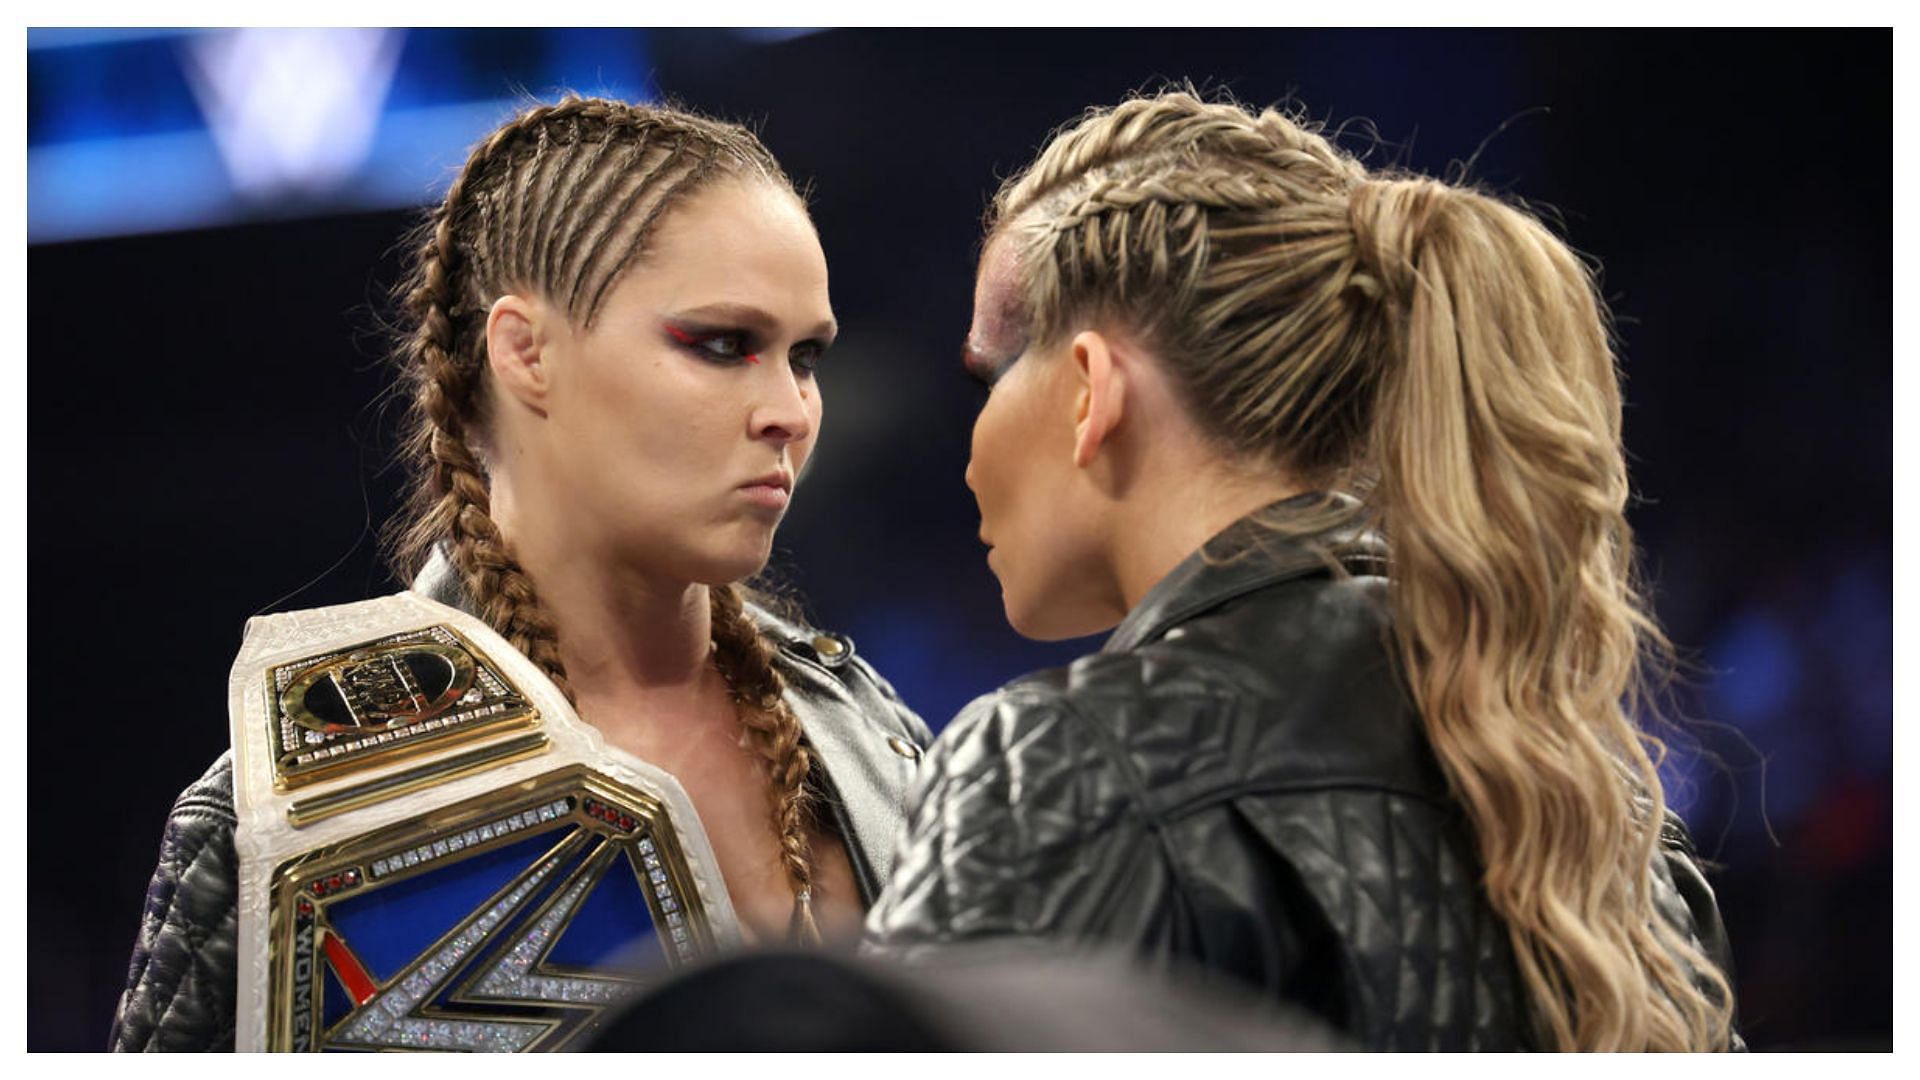 The feud between Rousey and Natalya has heated up on Twitter